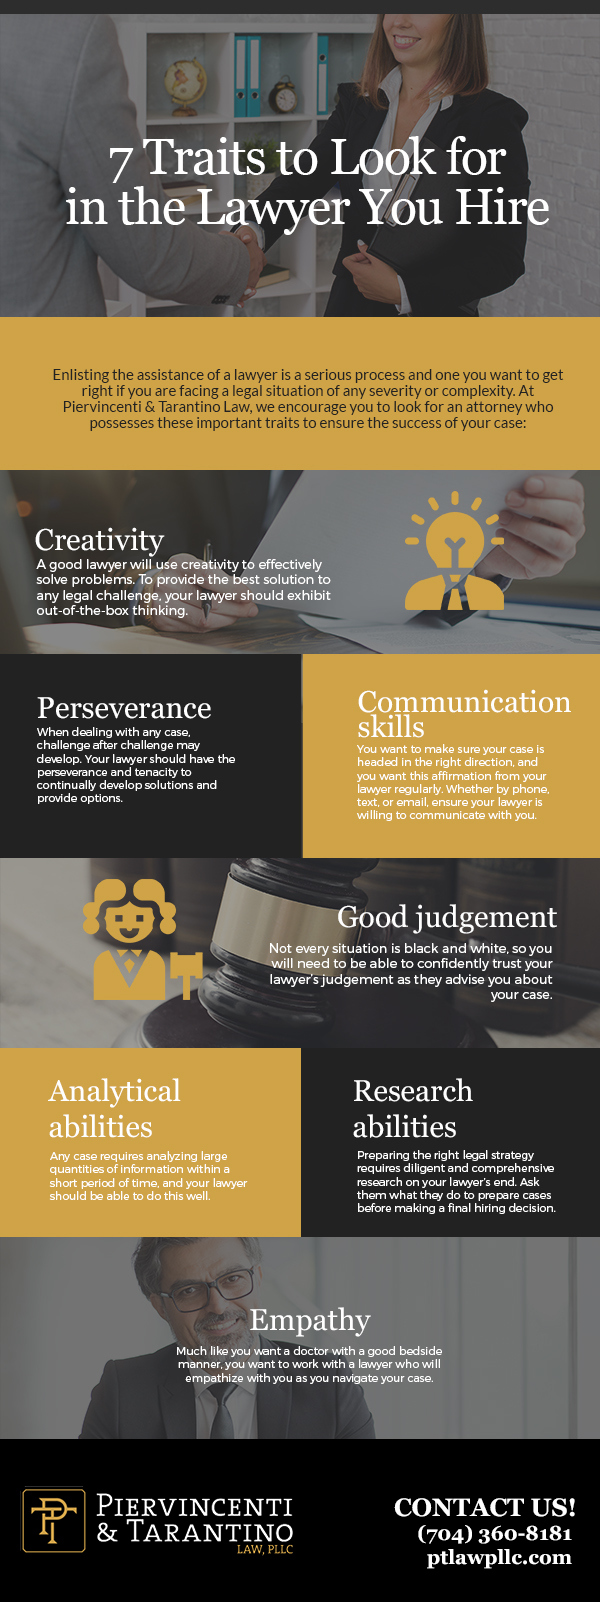 7 Traits to Look for in the Lawyer You Hire [infographic]